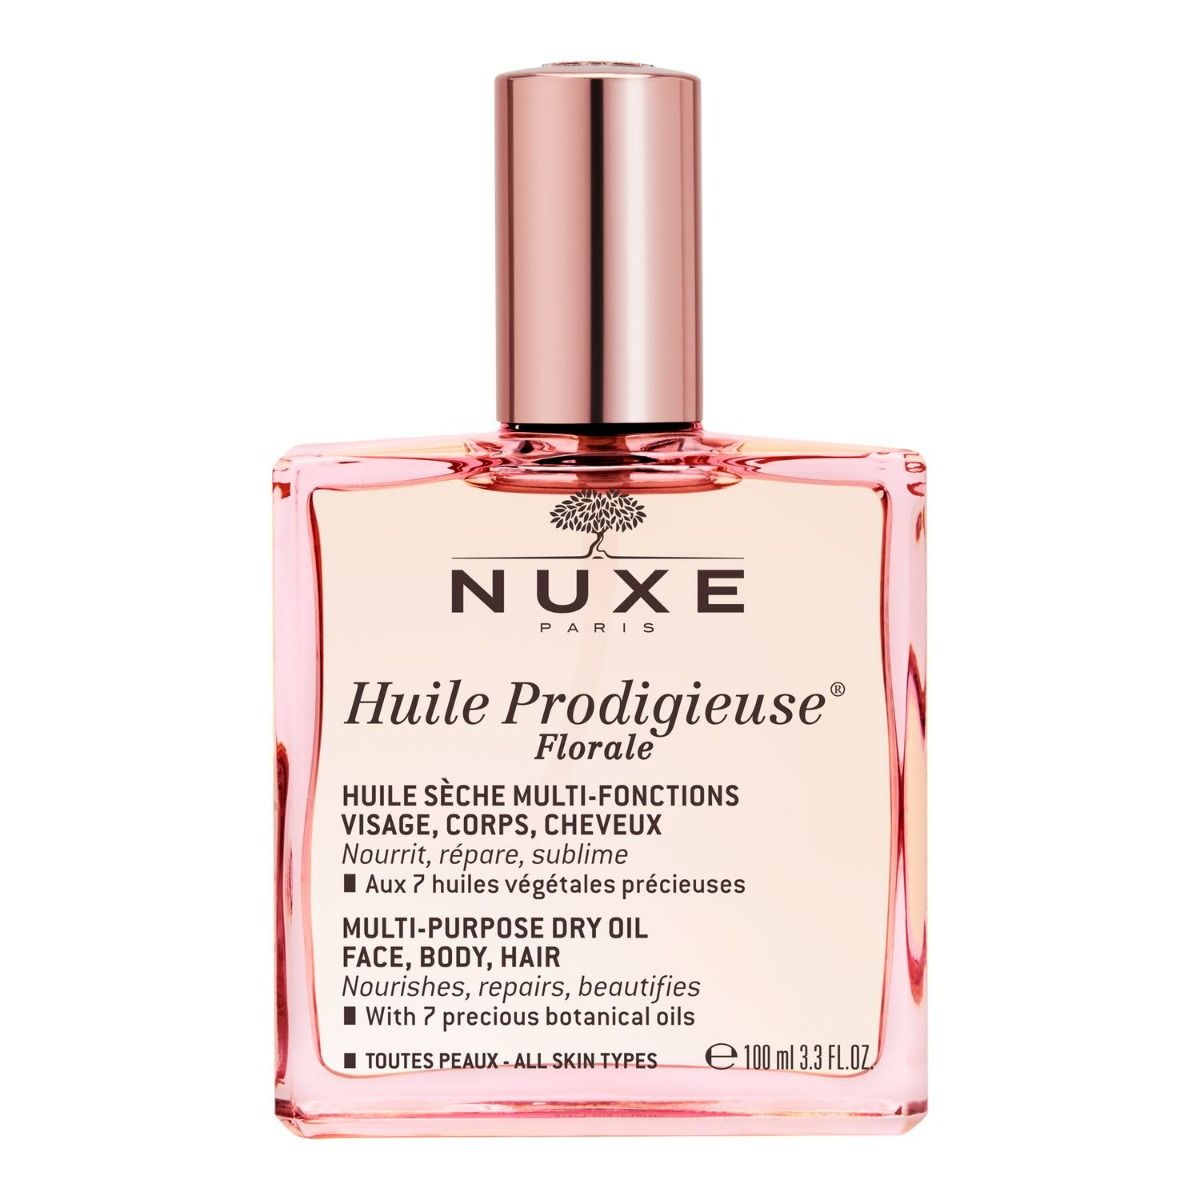 Nuxe Huile Prodigieuse Florale масло для лица, тела и волос, 100 ml nuxe масло для тела huile prodigieuse florale 100 мл